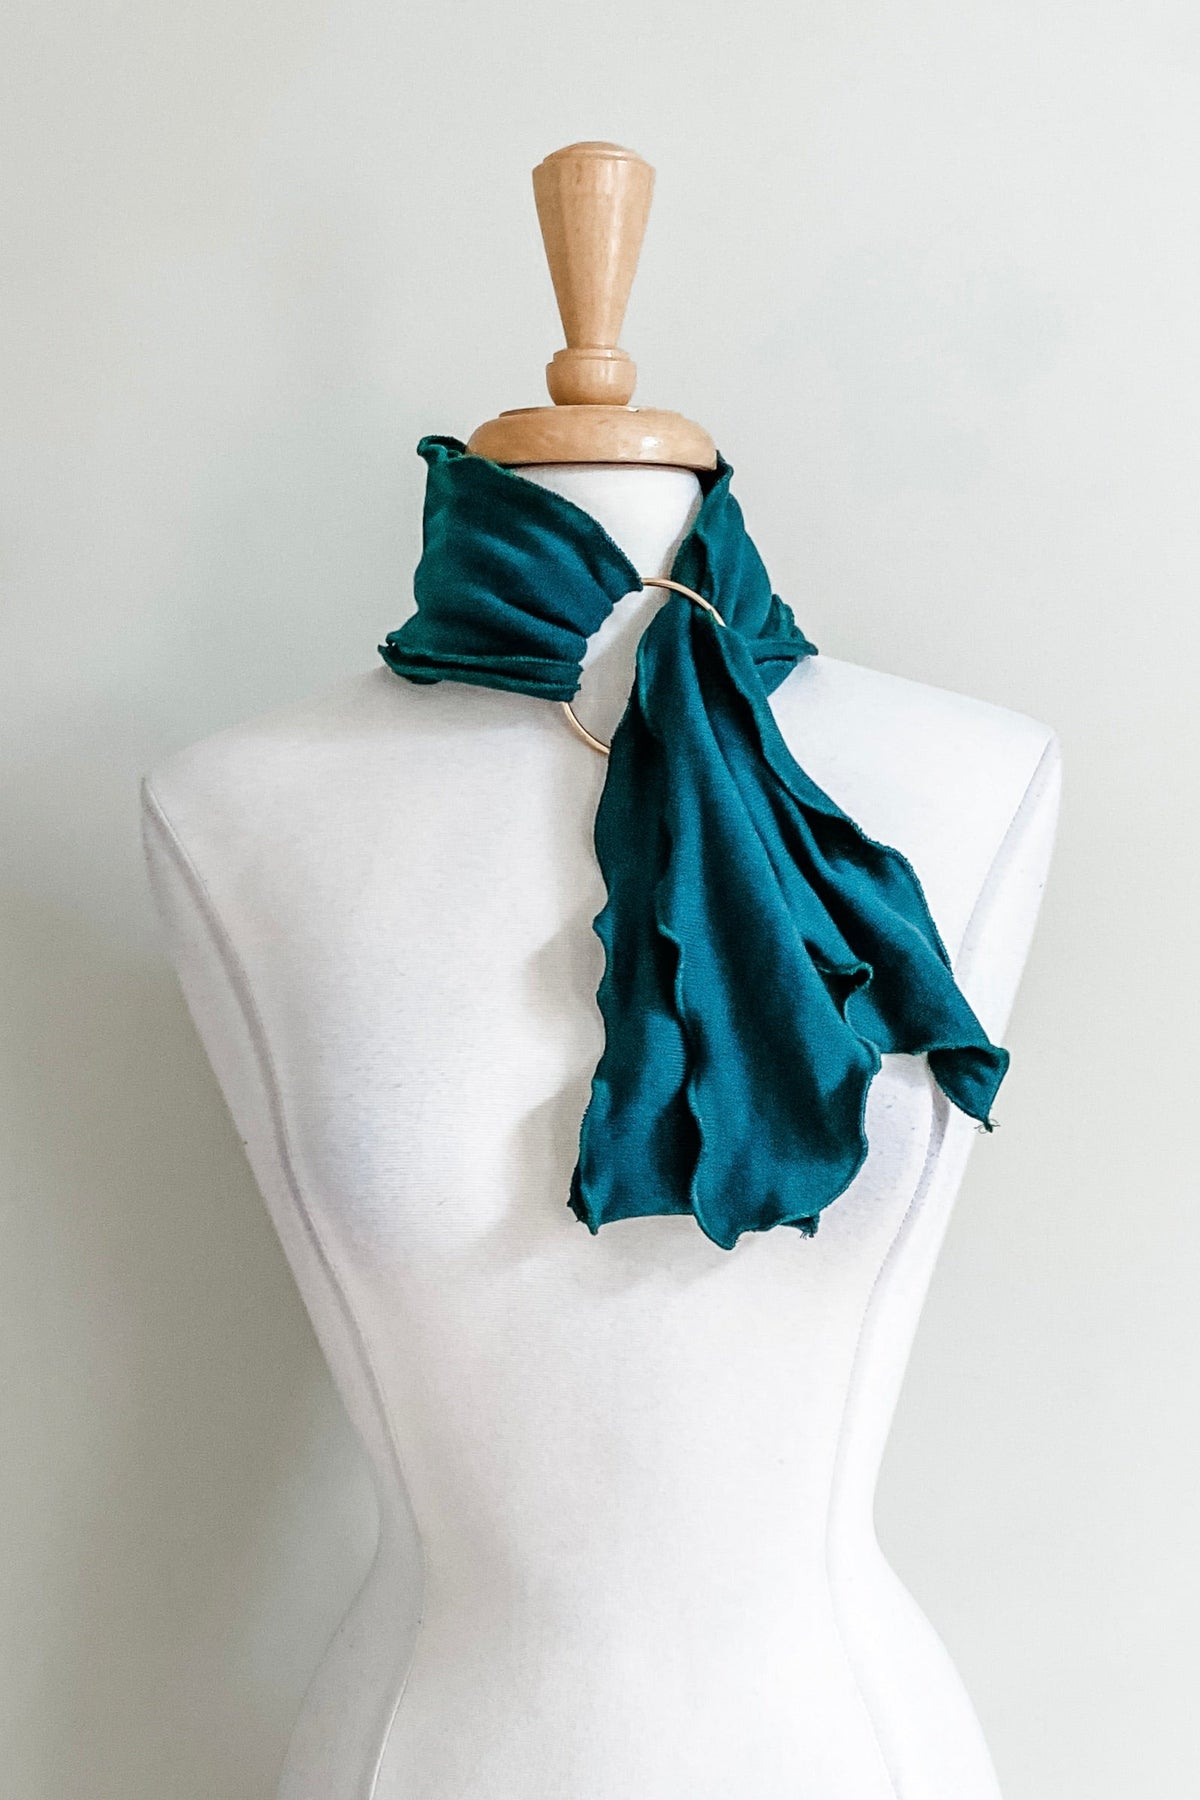 Matching Sash in Teal color from Diane Kroe